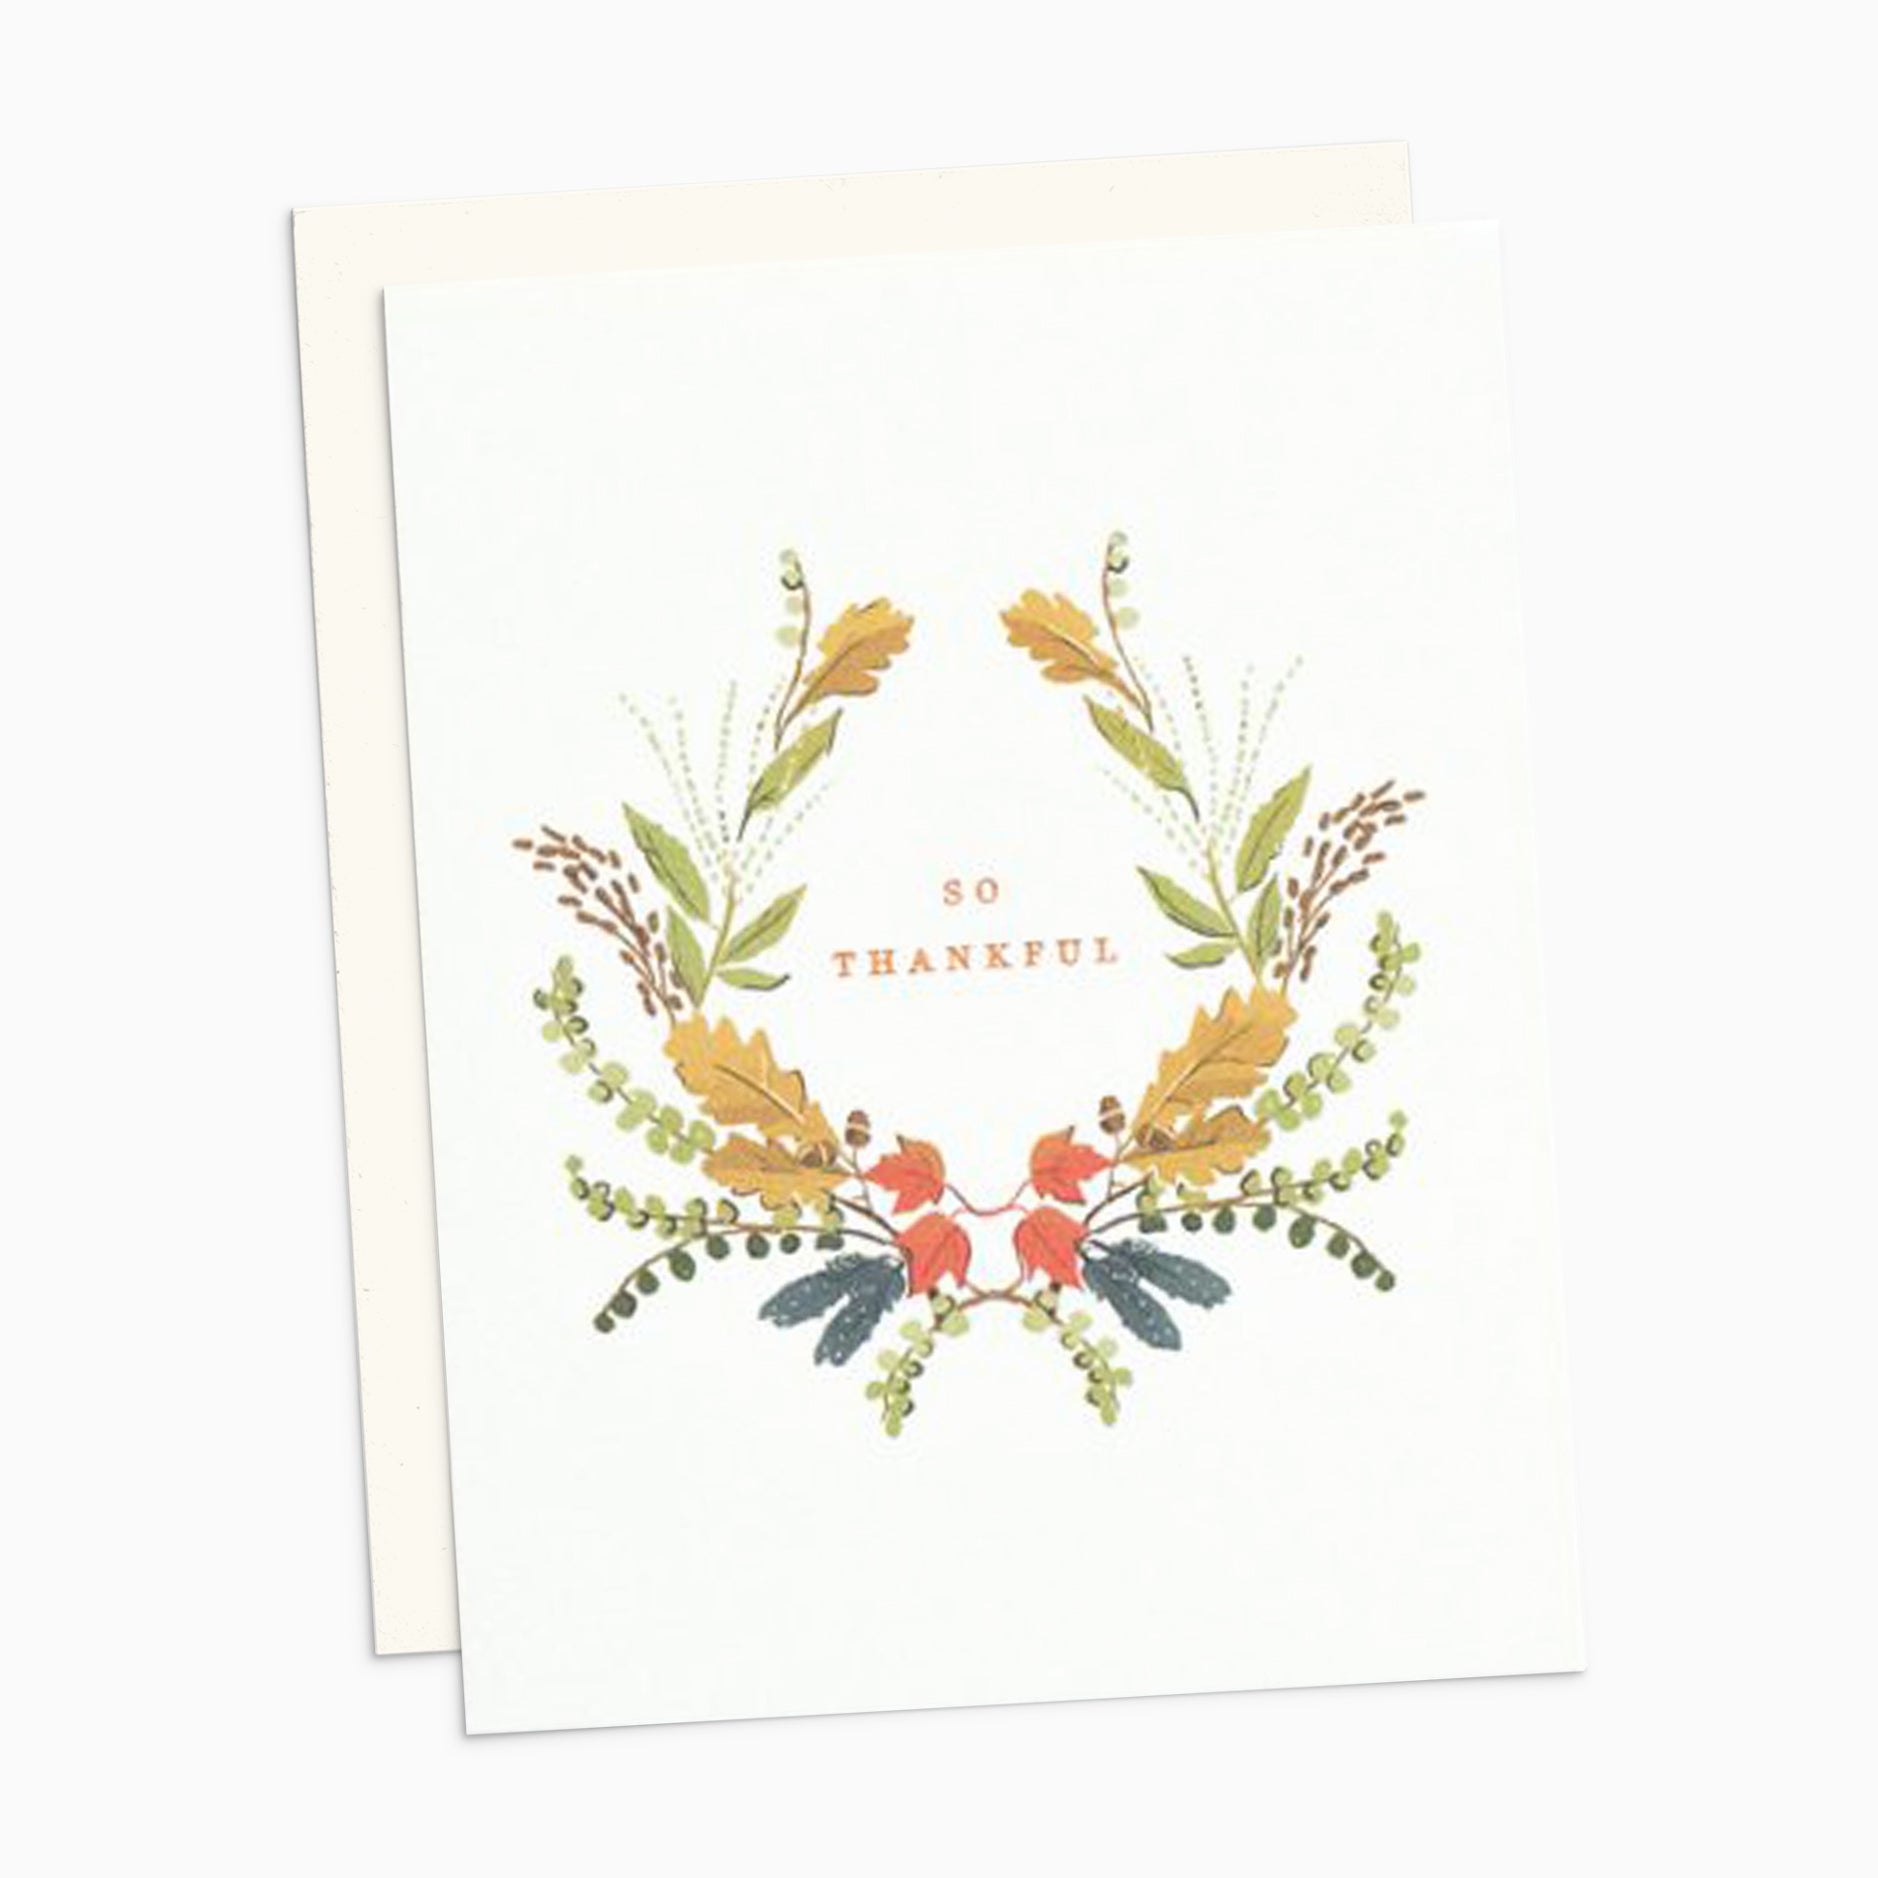 Illustrated Thanksgiving card with a wreath of fall-colored florals surrounding the gold foil words 'So Thankful' on warm white cardstock.